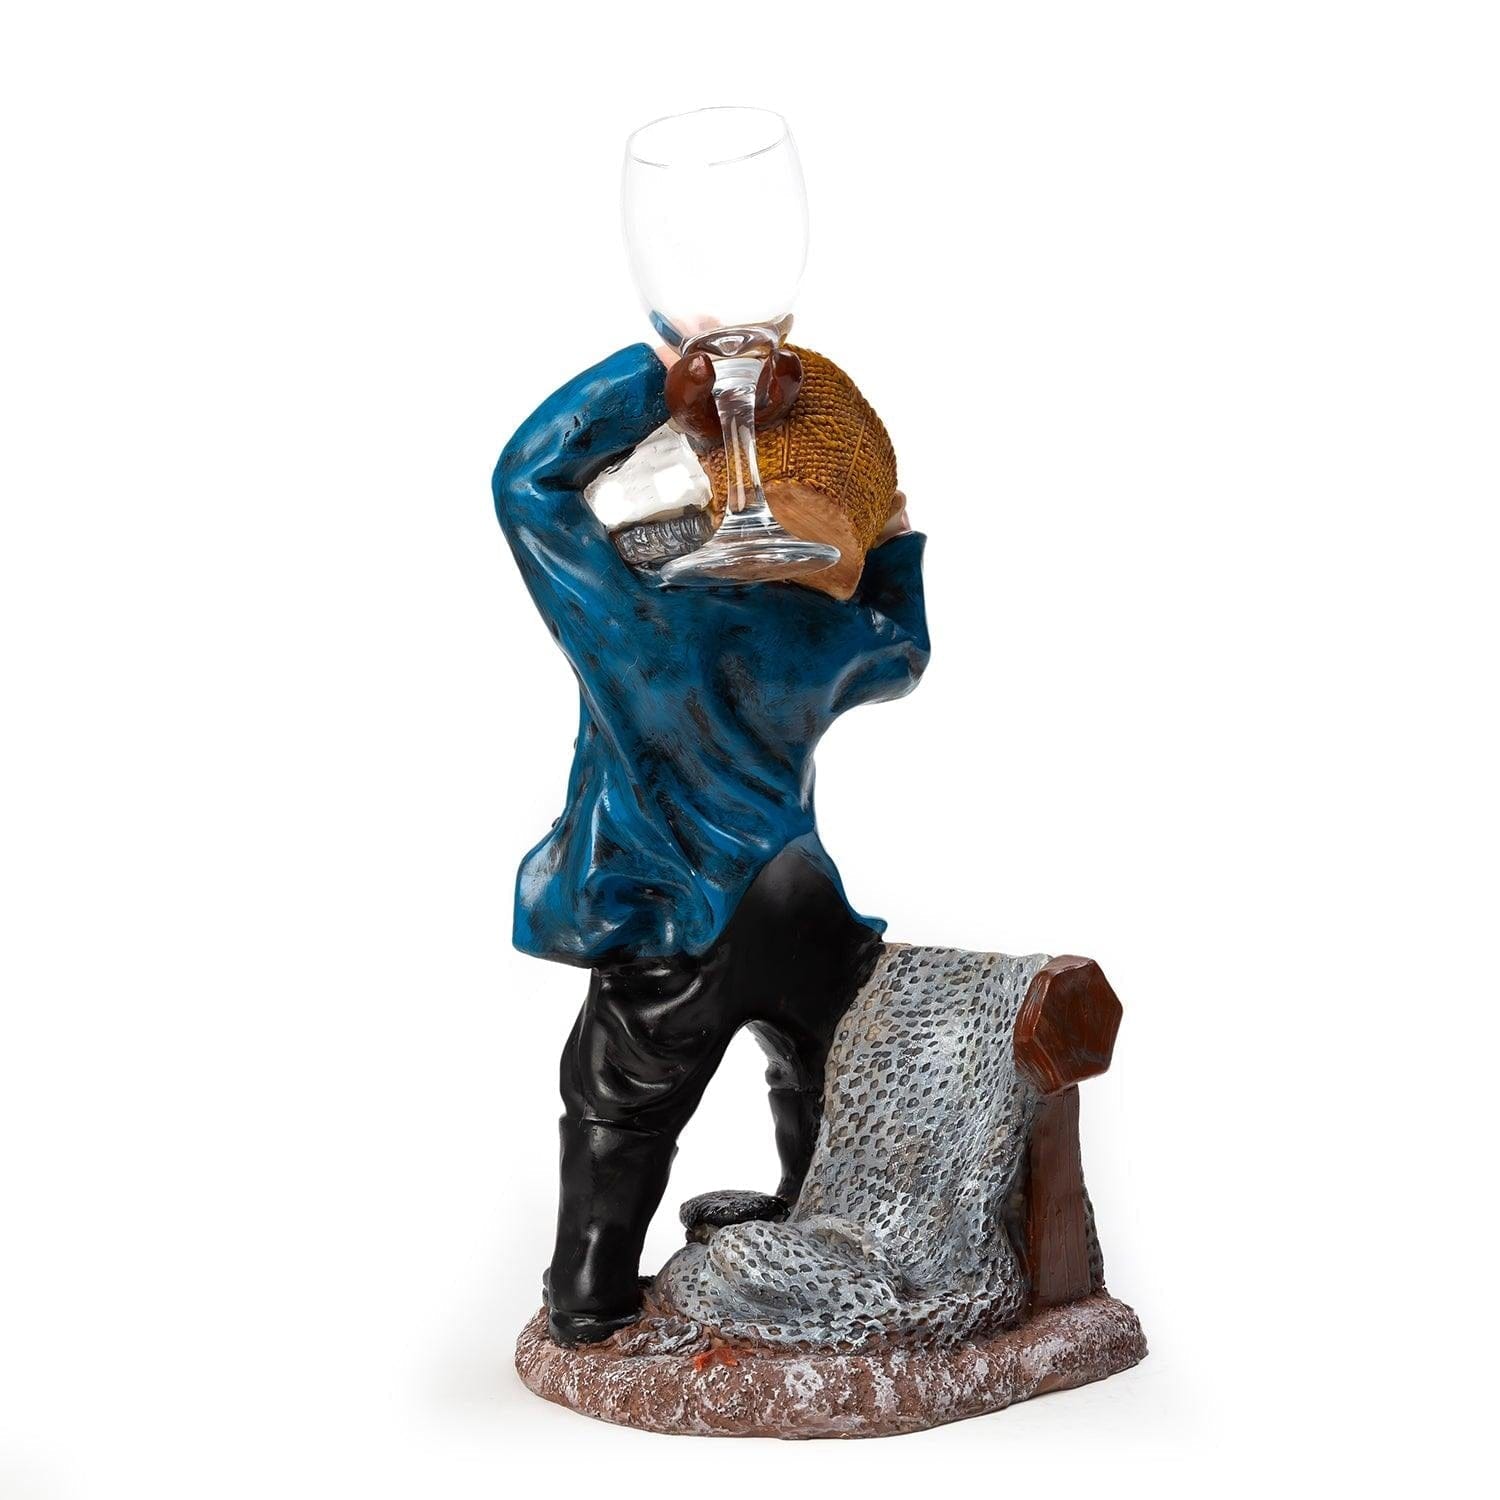 Nautical Sailor Figurine Resin Bottle Holder with 1 Wine Glass Set (Laundry - Red Shirt)